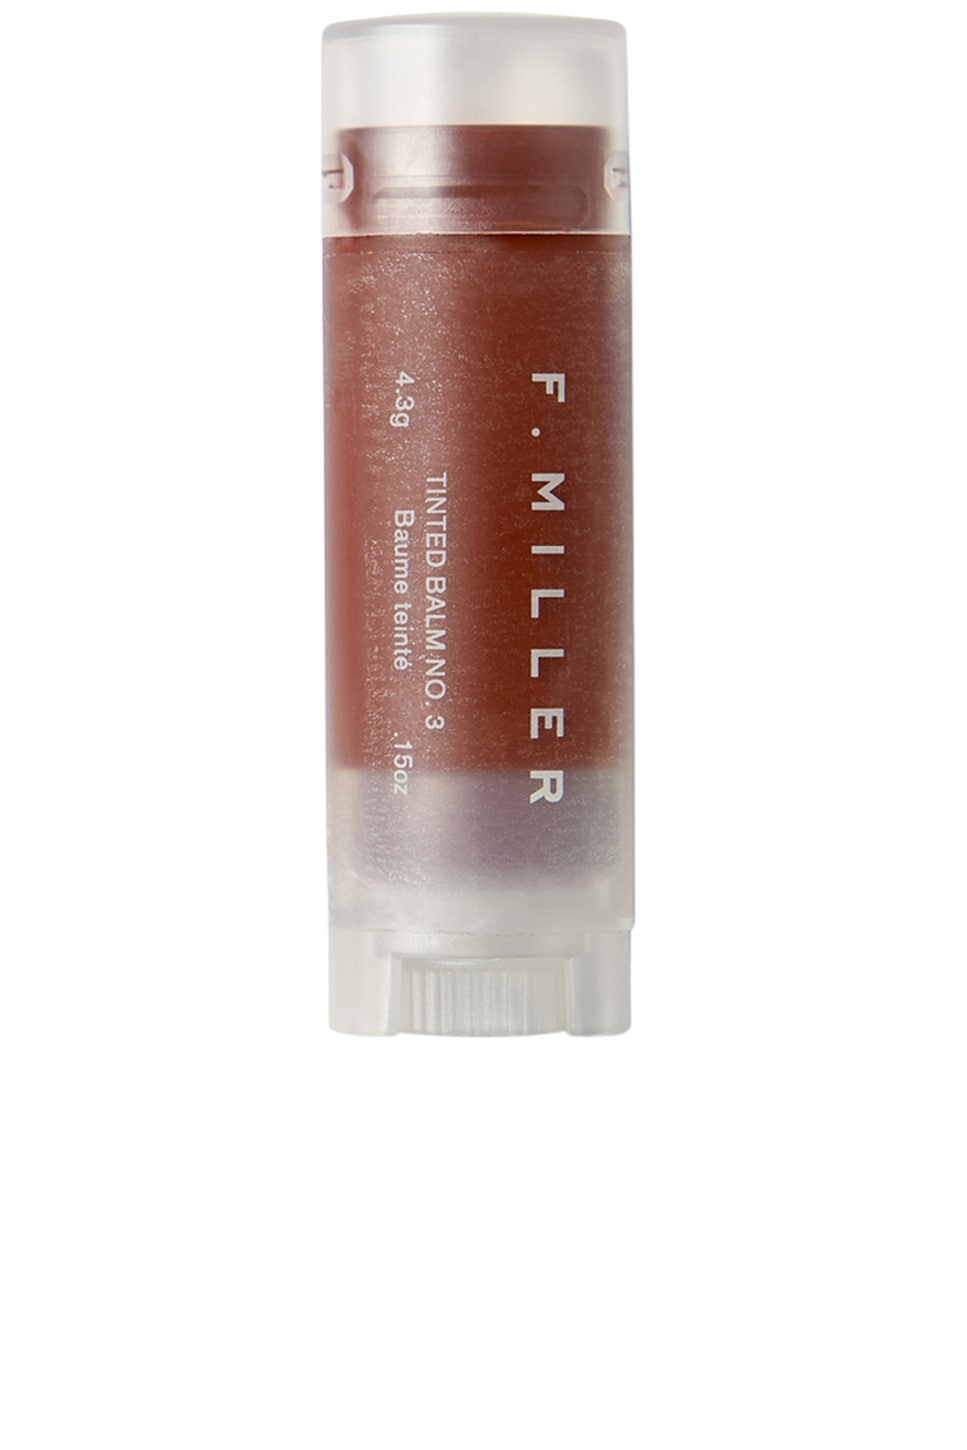 Tinted Balm No.3 in Taupe